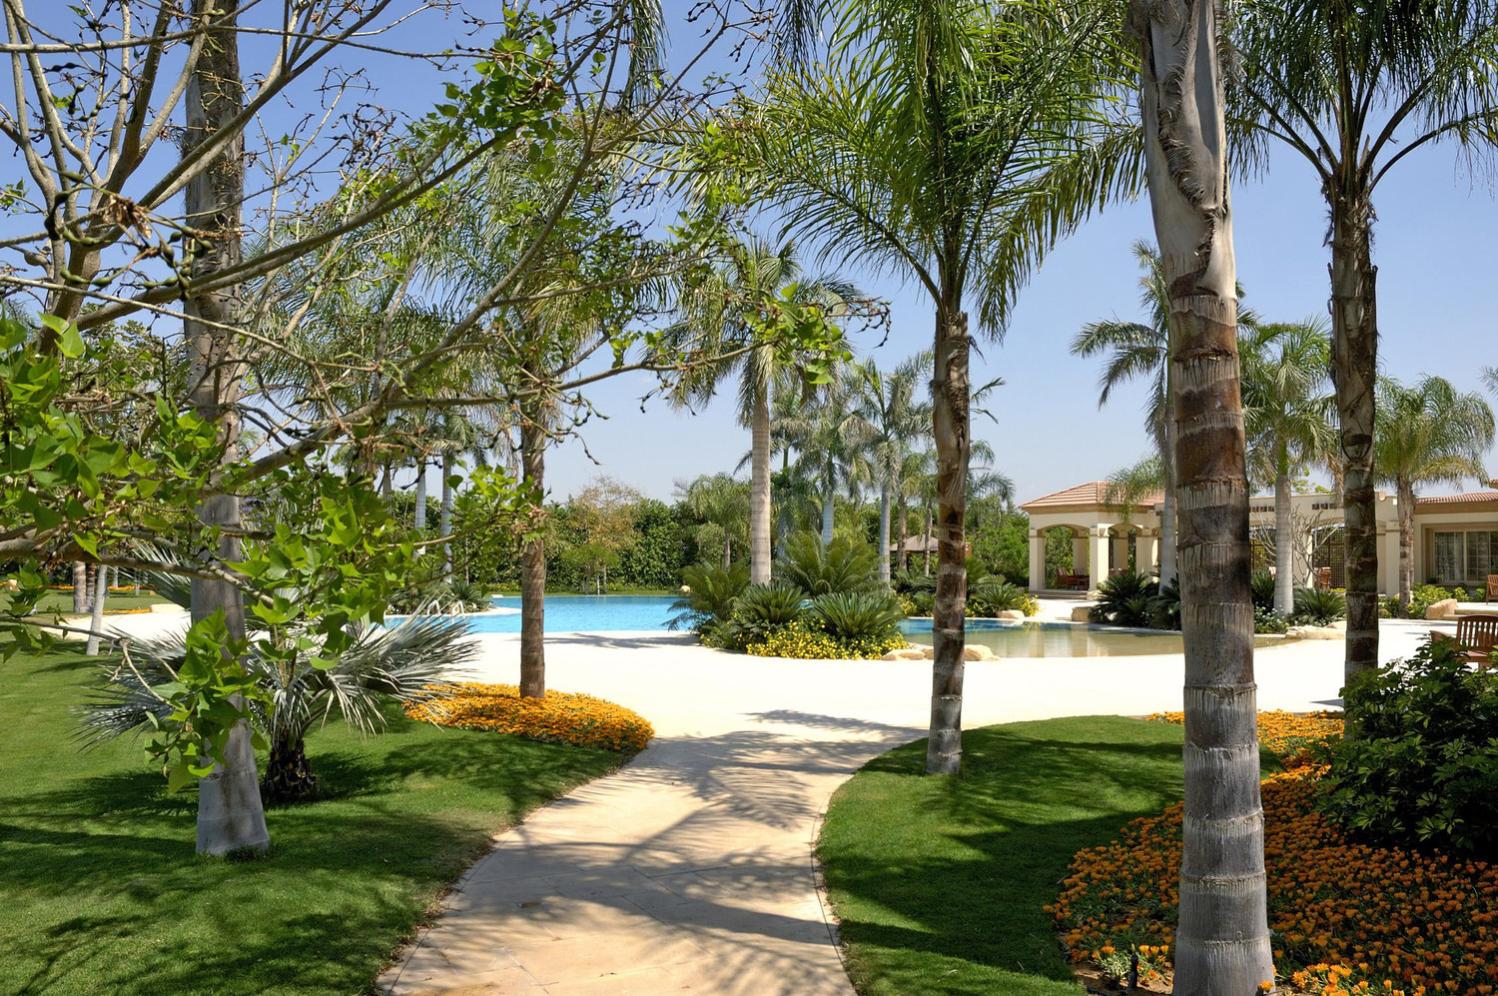 Walkway leading to the pool area framed with shade trees and palms